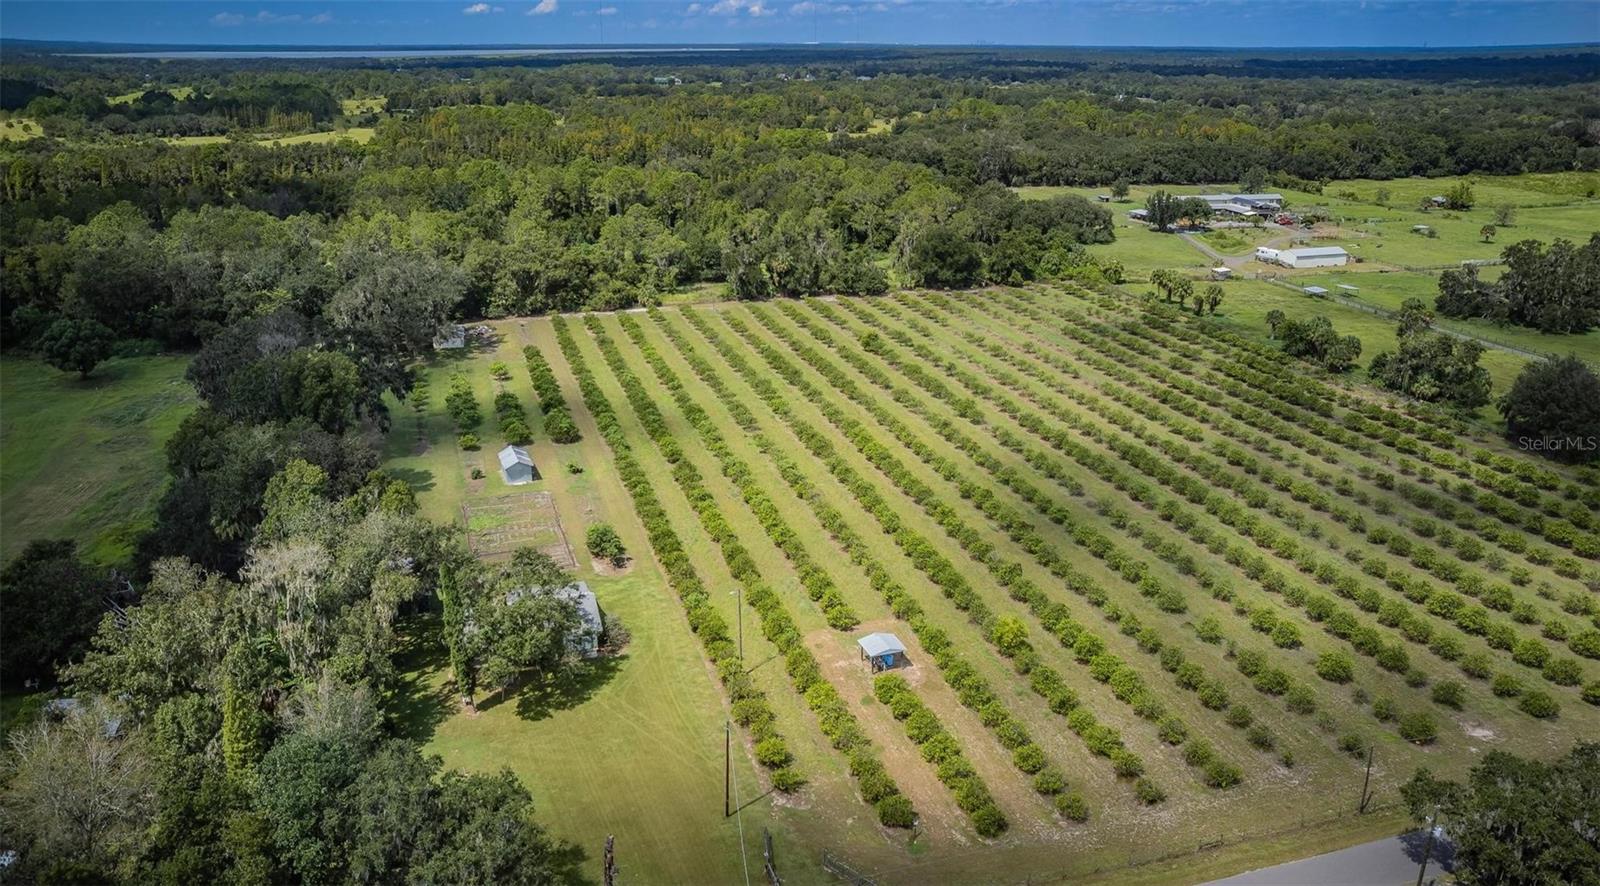 10 acres of 10 year old orange groves